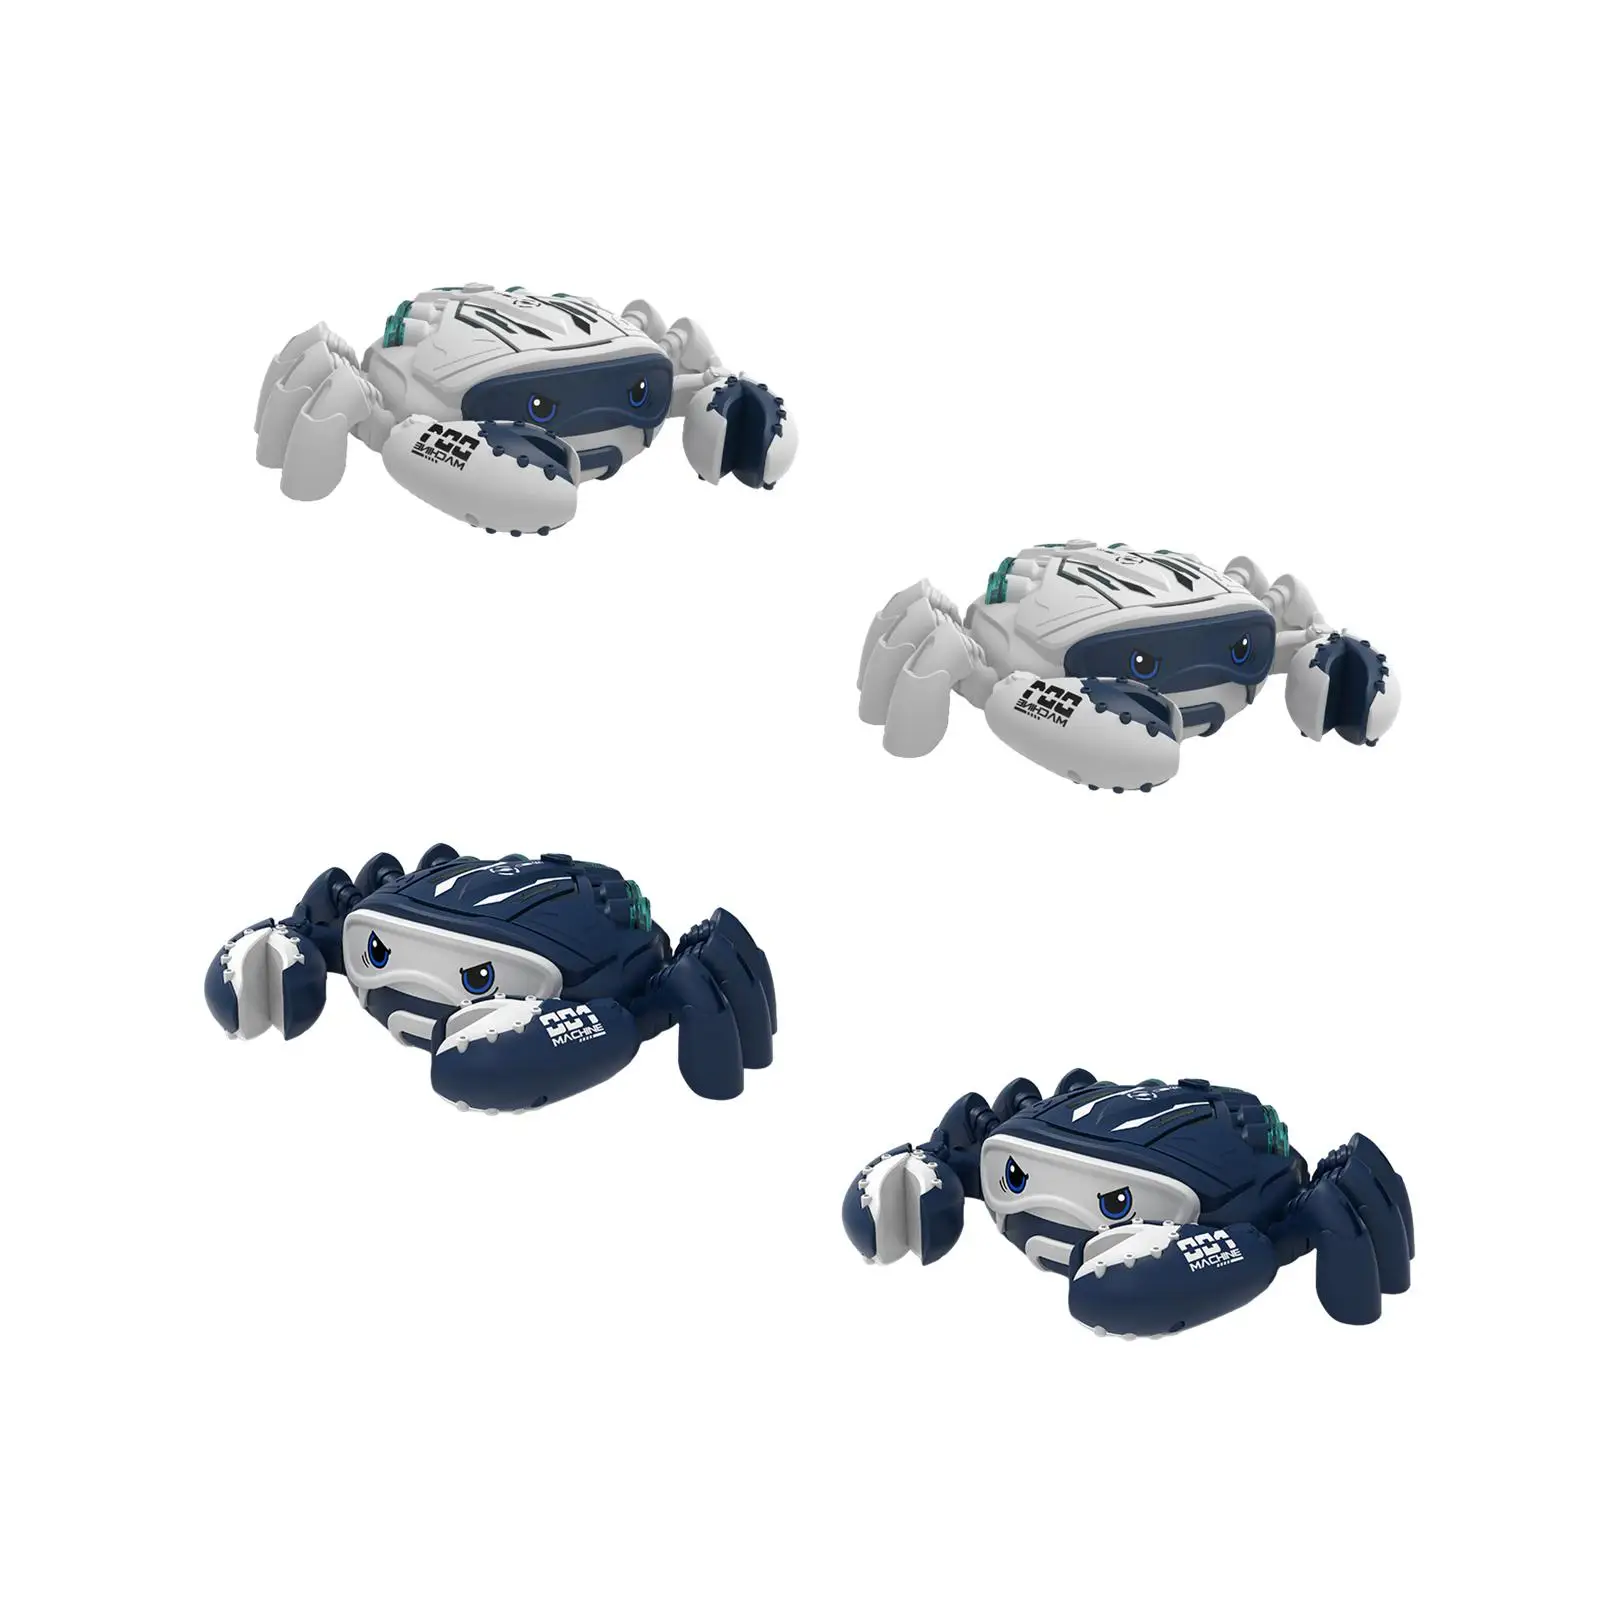 Crawling Toy Crabs Toys Interactive Electric Walking Toys Moving Toy Infant Toys for Children Crawling Toys Boys Girls Gifts